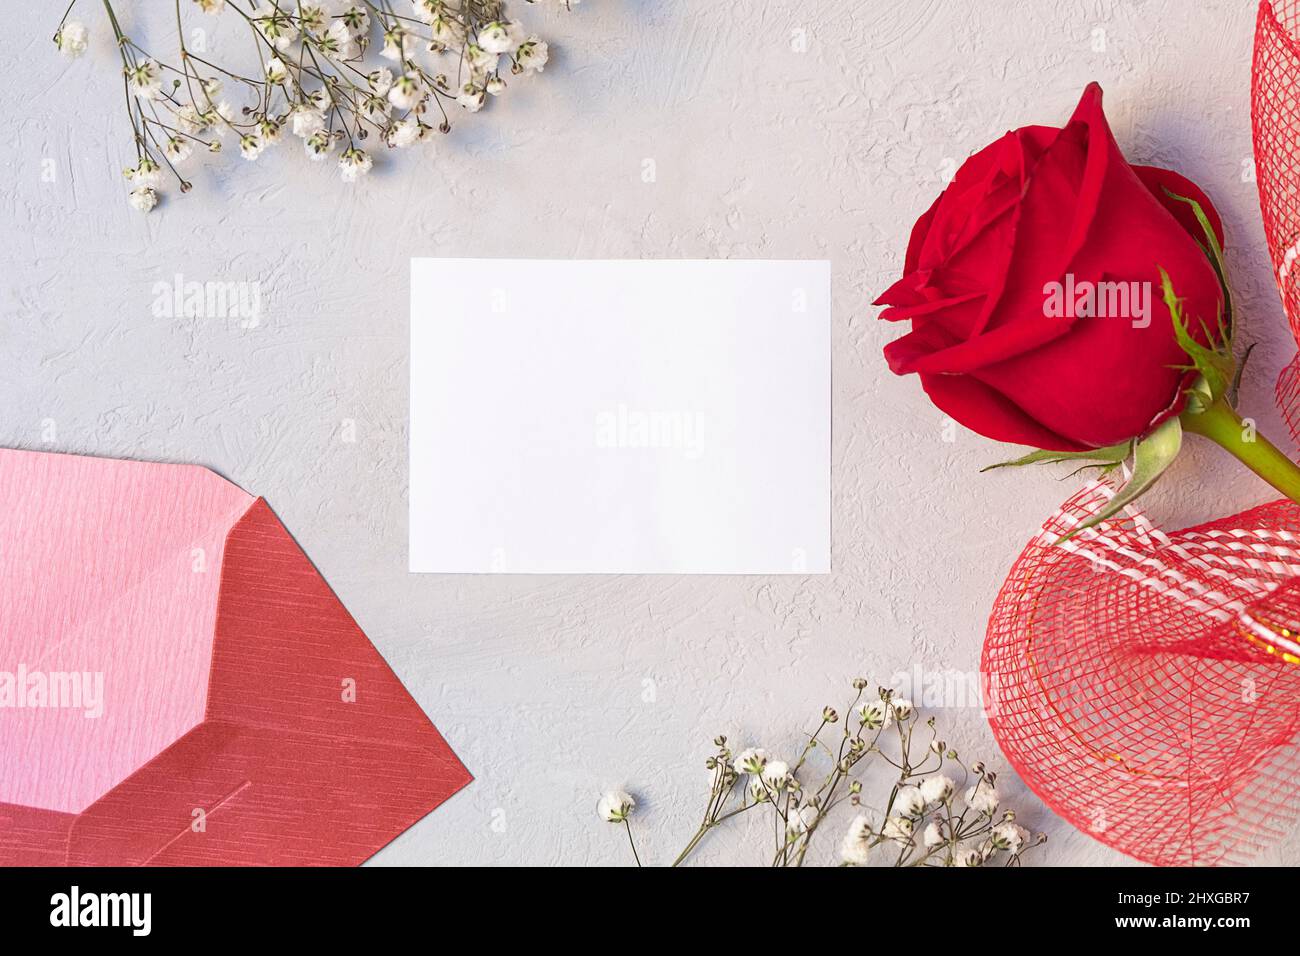 Floral composition with red rose, white flowers, envelope and blank paper card. Top view, flat lay Stock Photo